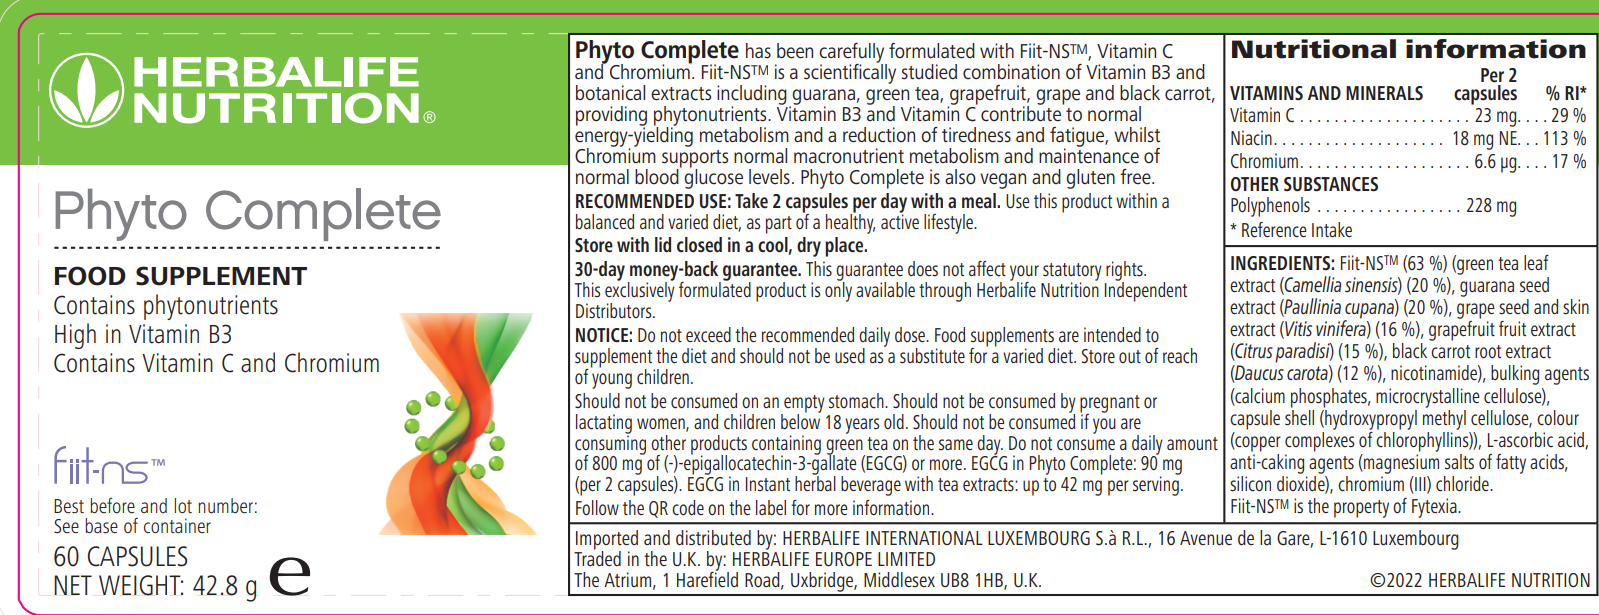 Phyto Complete Label Information